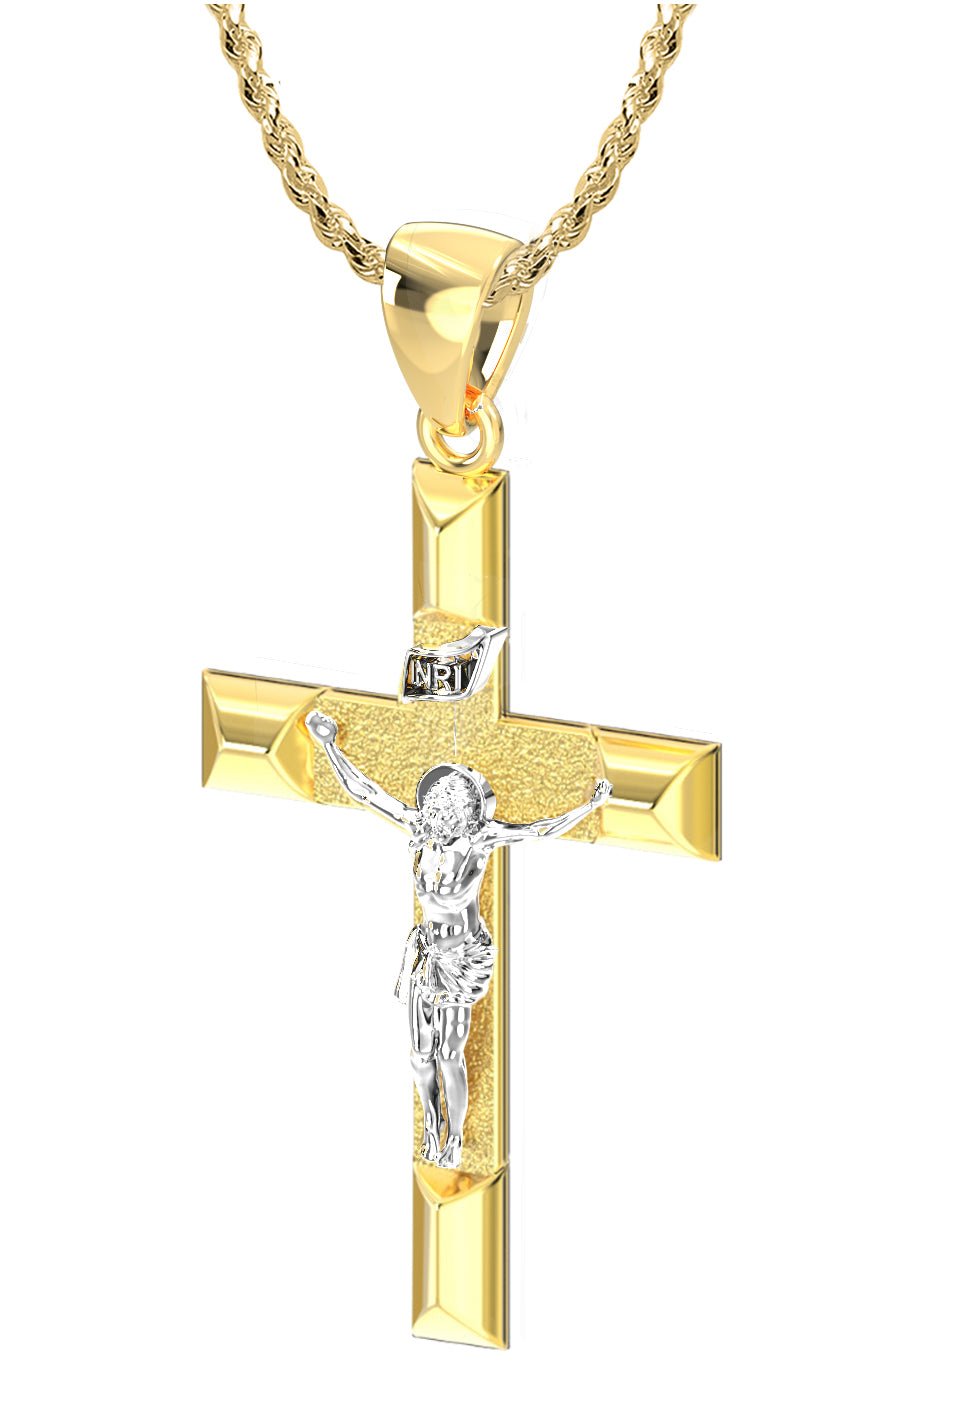 Jesus Christ INRI Crucifix Cross Pendant Necklace In 14K Gold Plated 925  Sterling Silver For Women 18